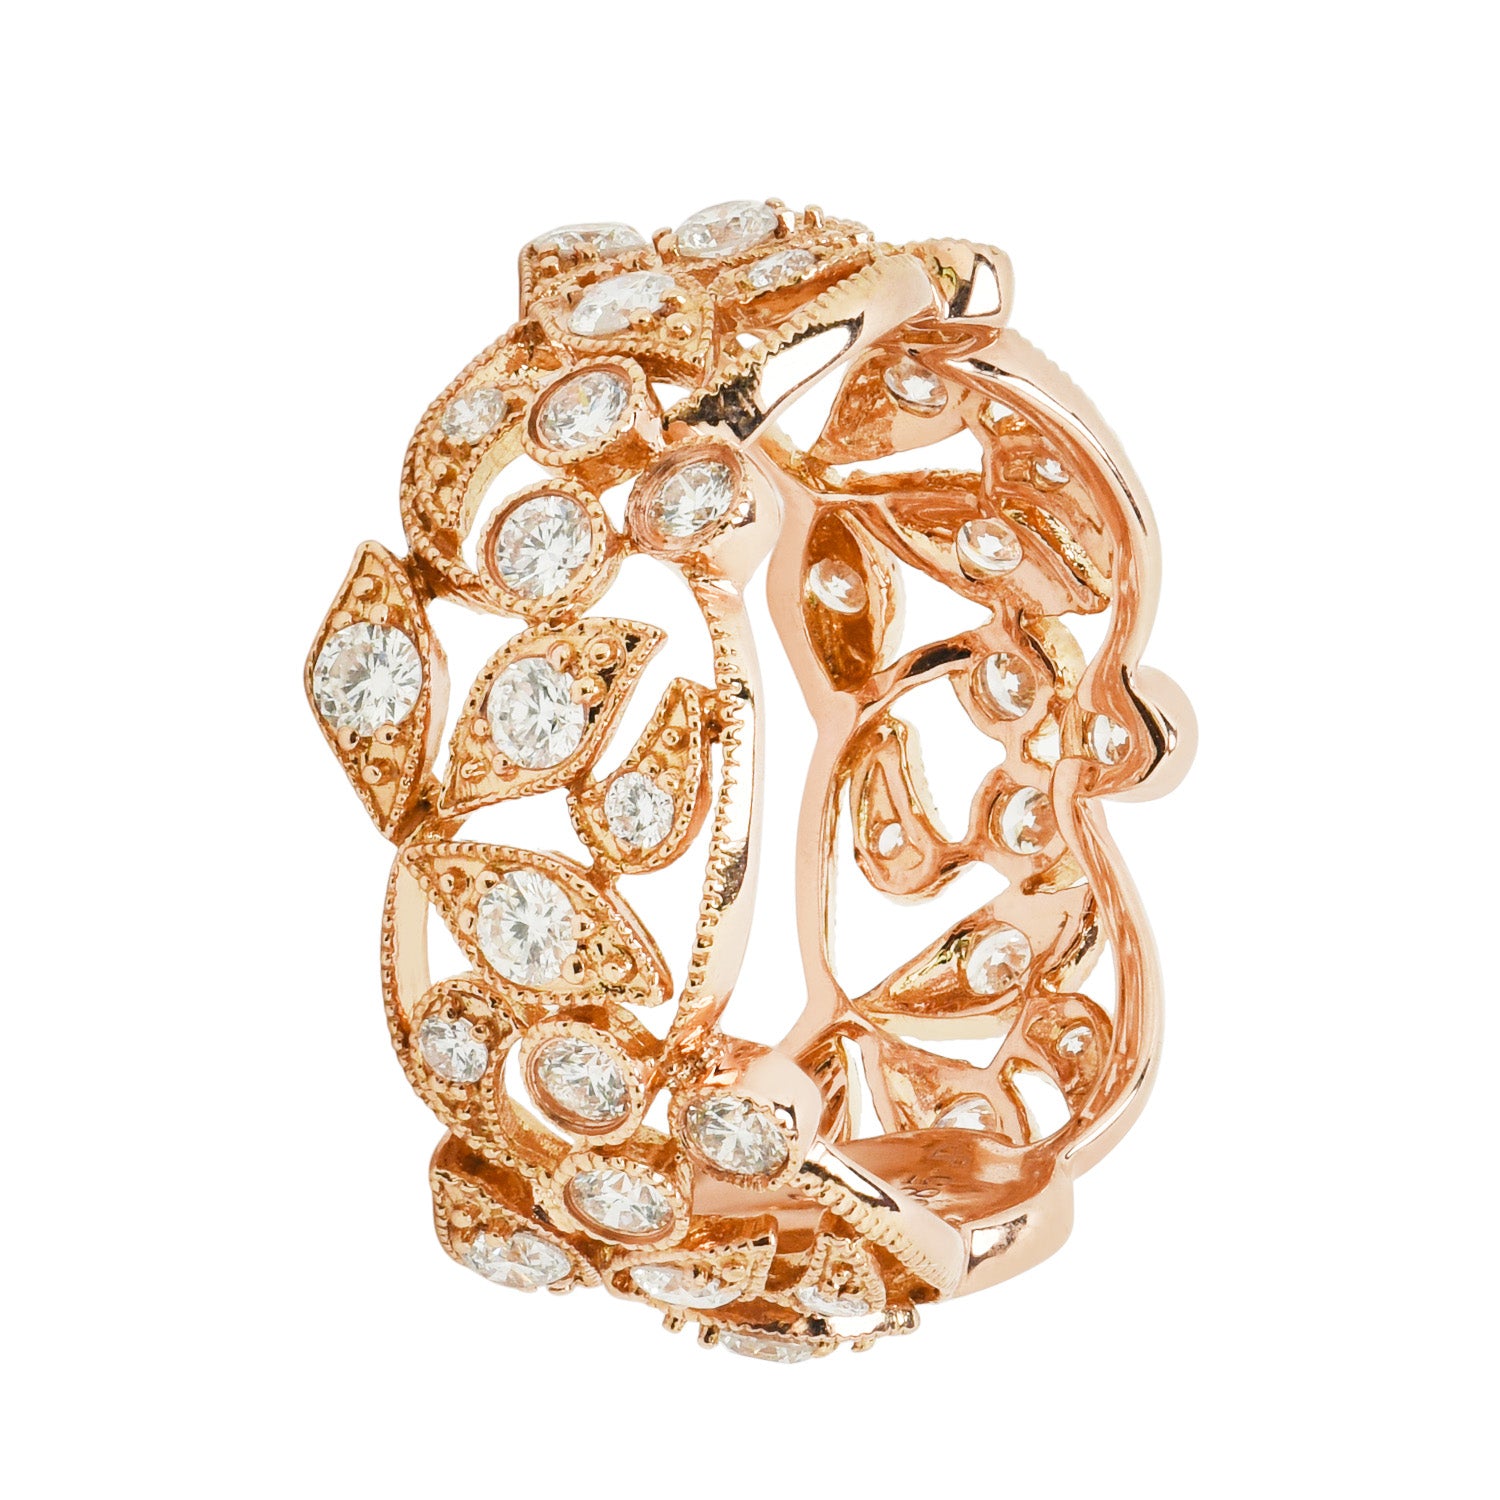 Diamond Leaf Fashion Ring in 14kt Rose Gold (1 1/4ct tw)